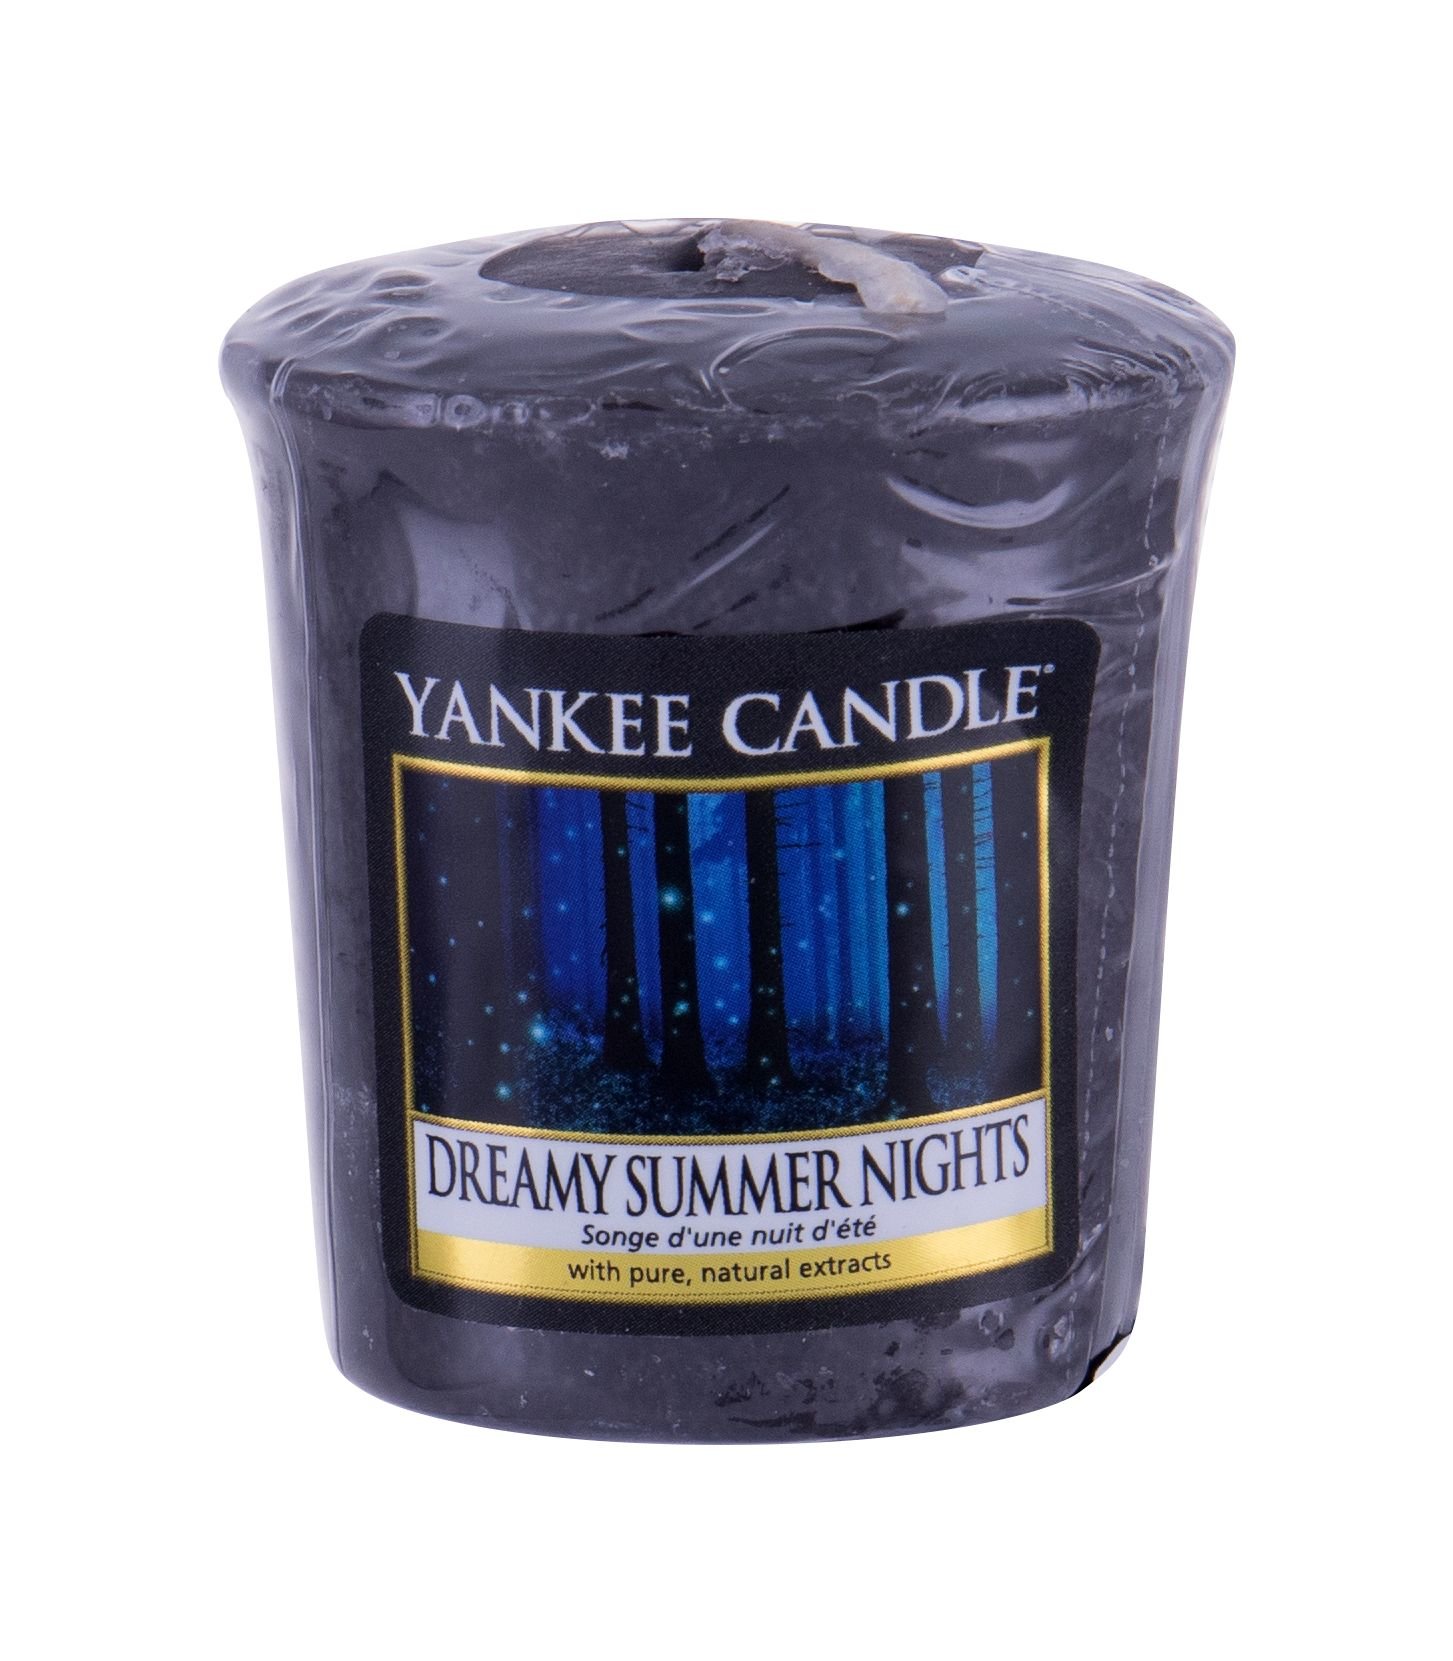 Yankee Candle Dreamy Summer Nights 49g Kvepalai Unisex Scented Candle